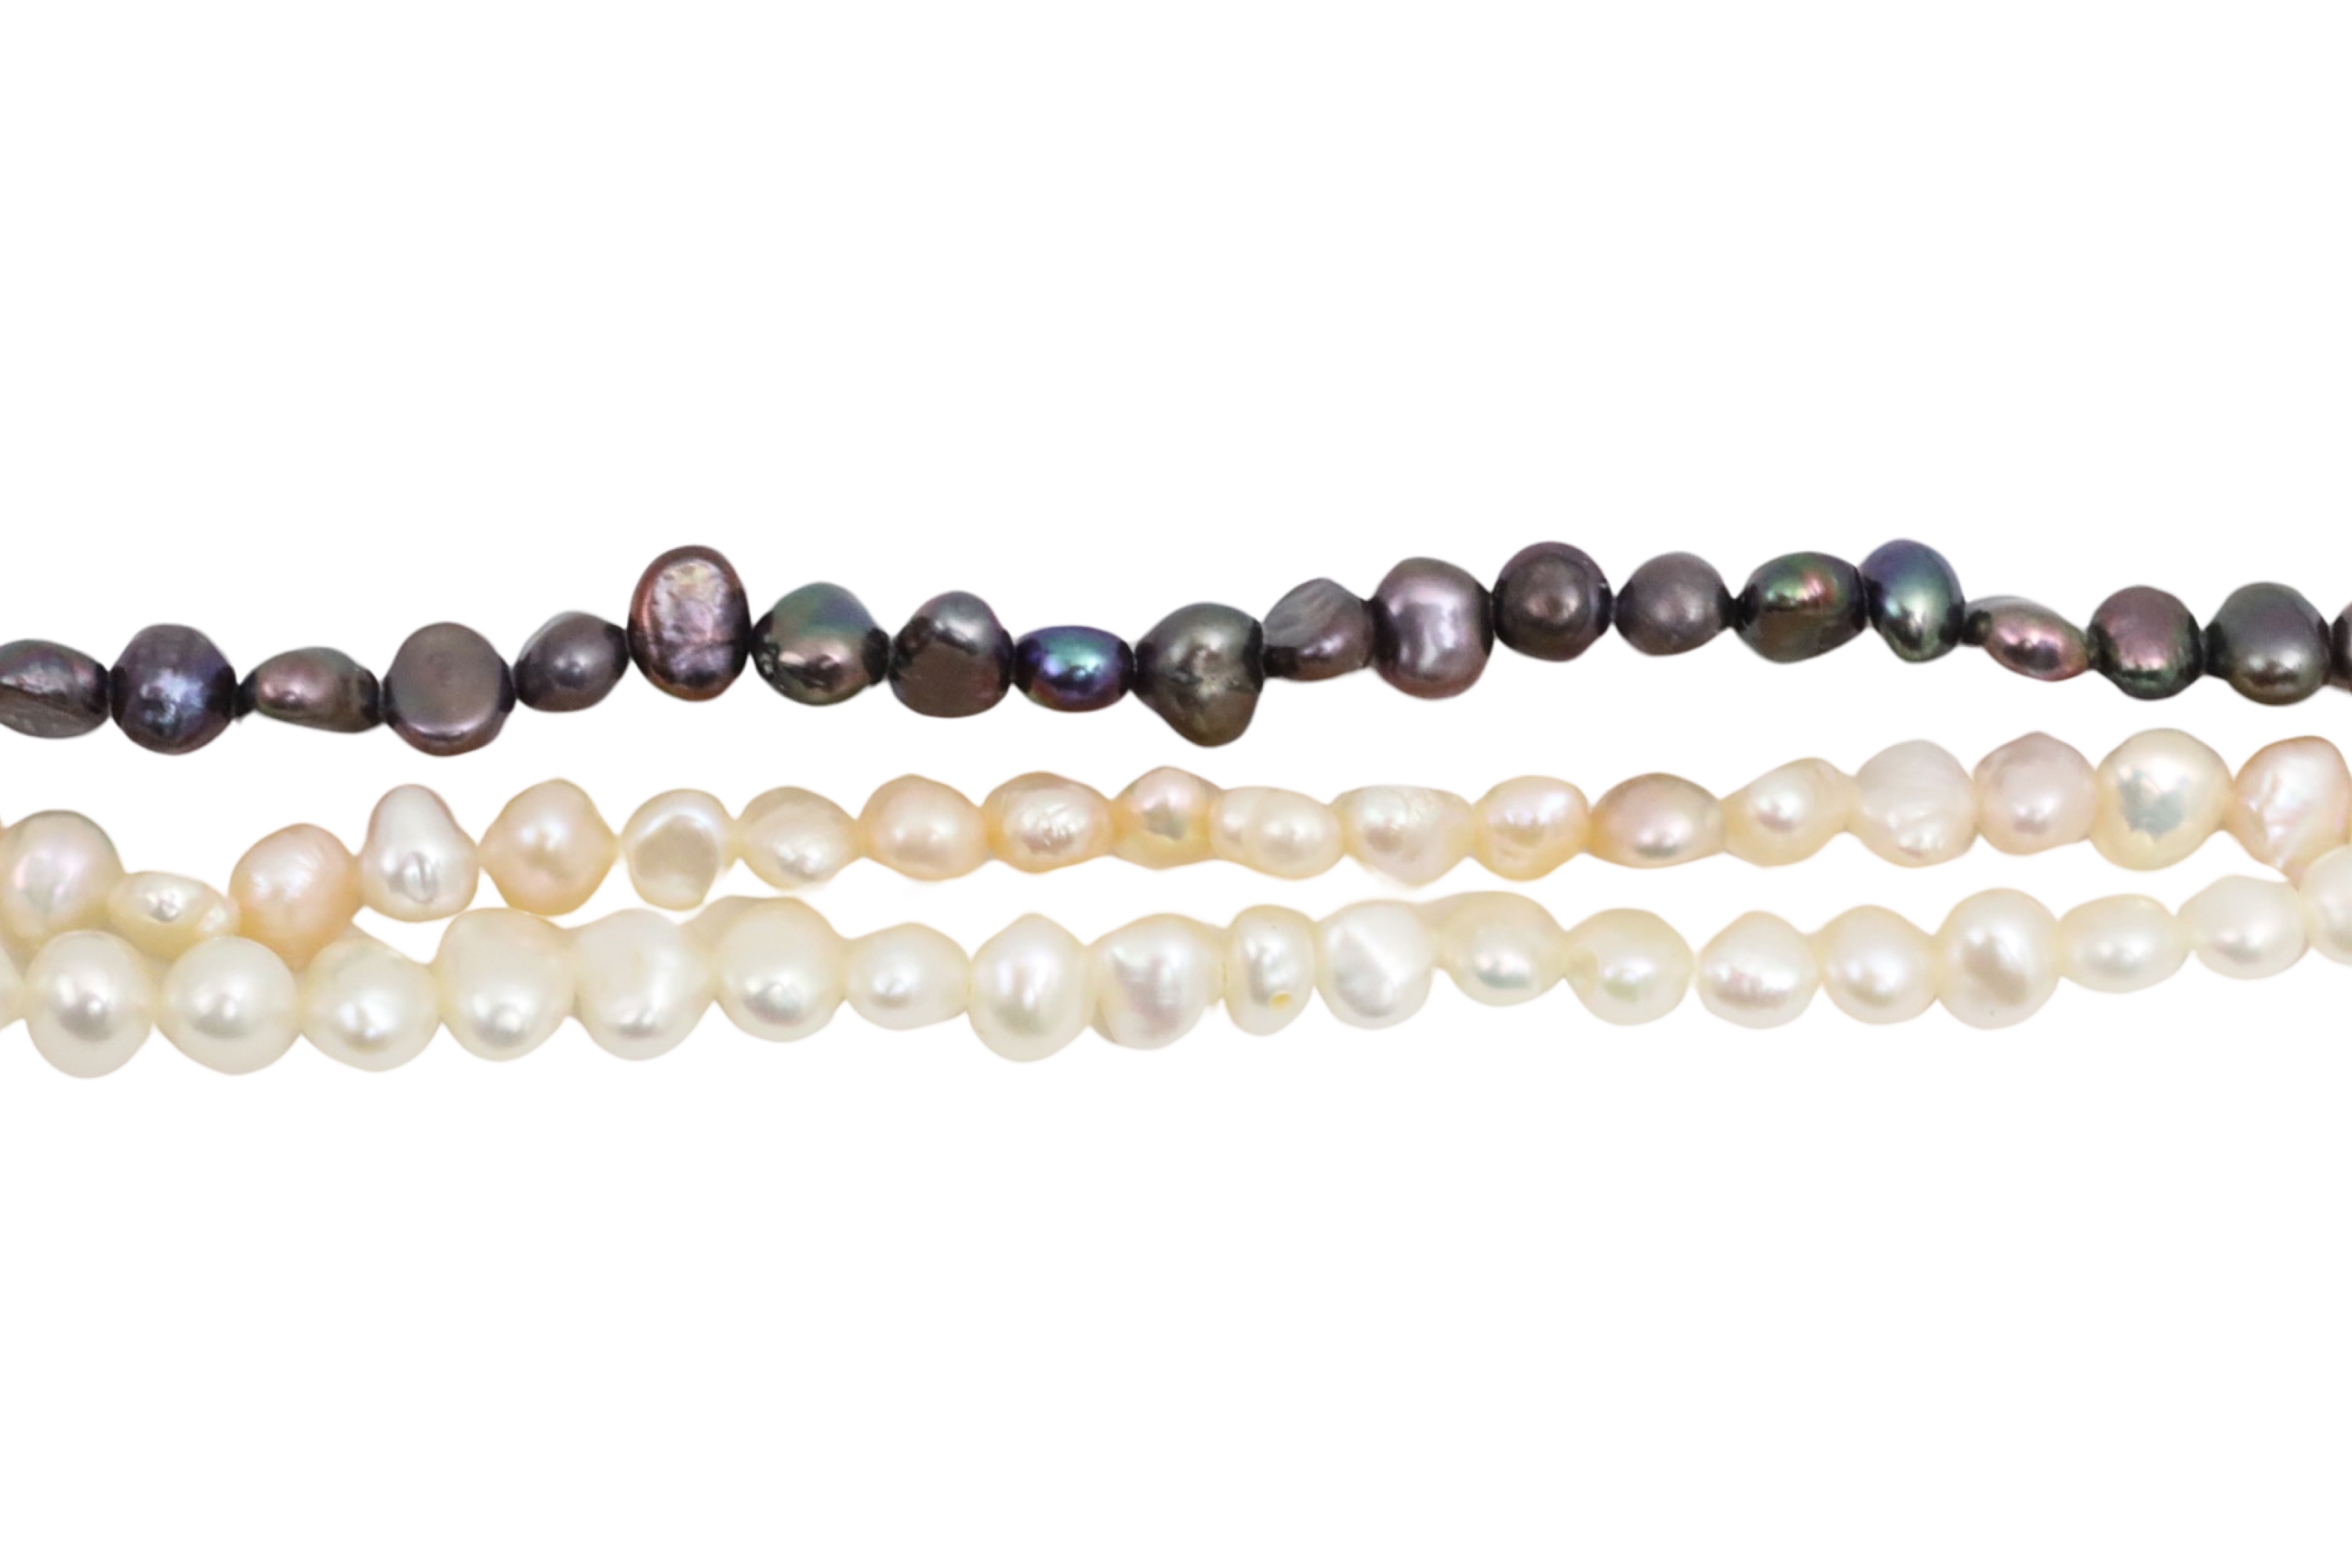 3 STRAND 18 SOUTH SEA PEARL NECKLACE 3ccaf2